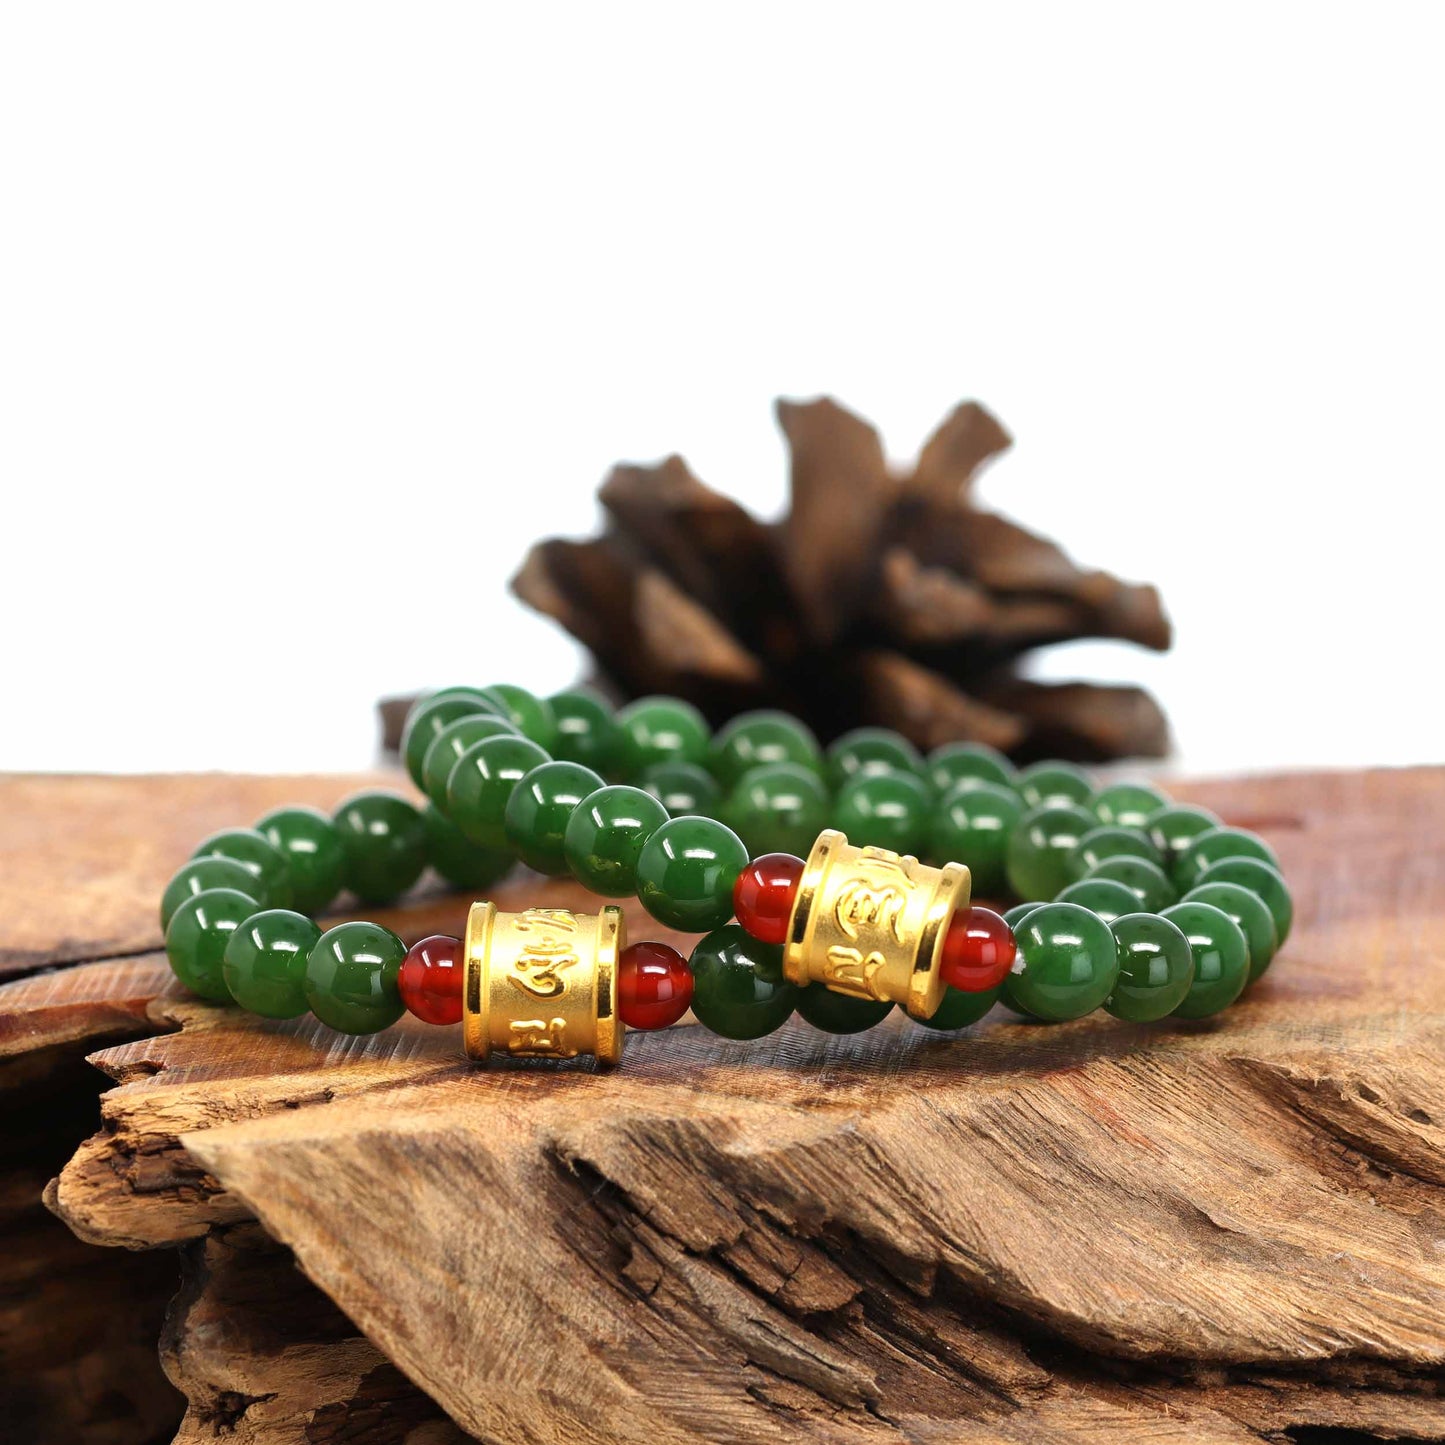 The Many Meanings & Benefits of a Jade Bracelet